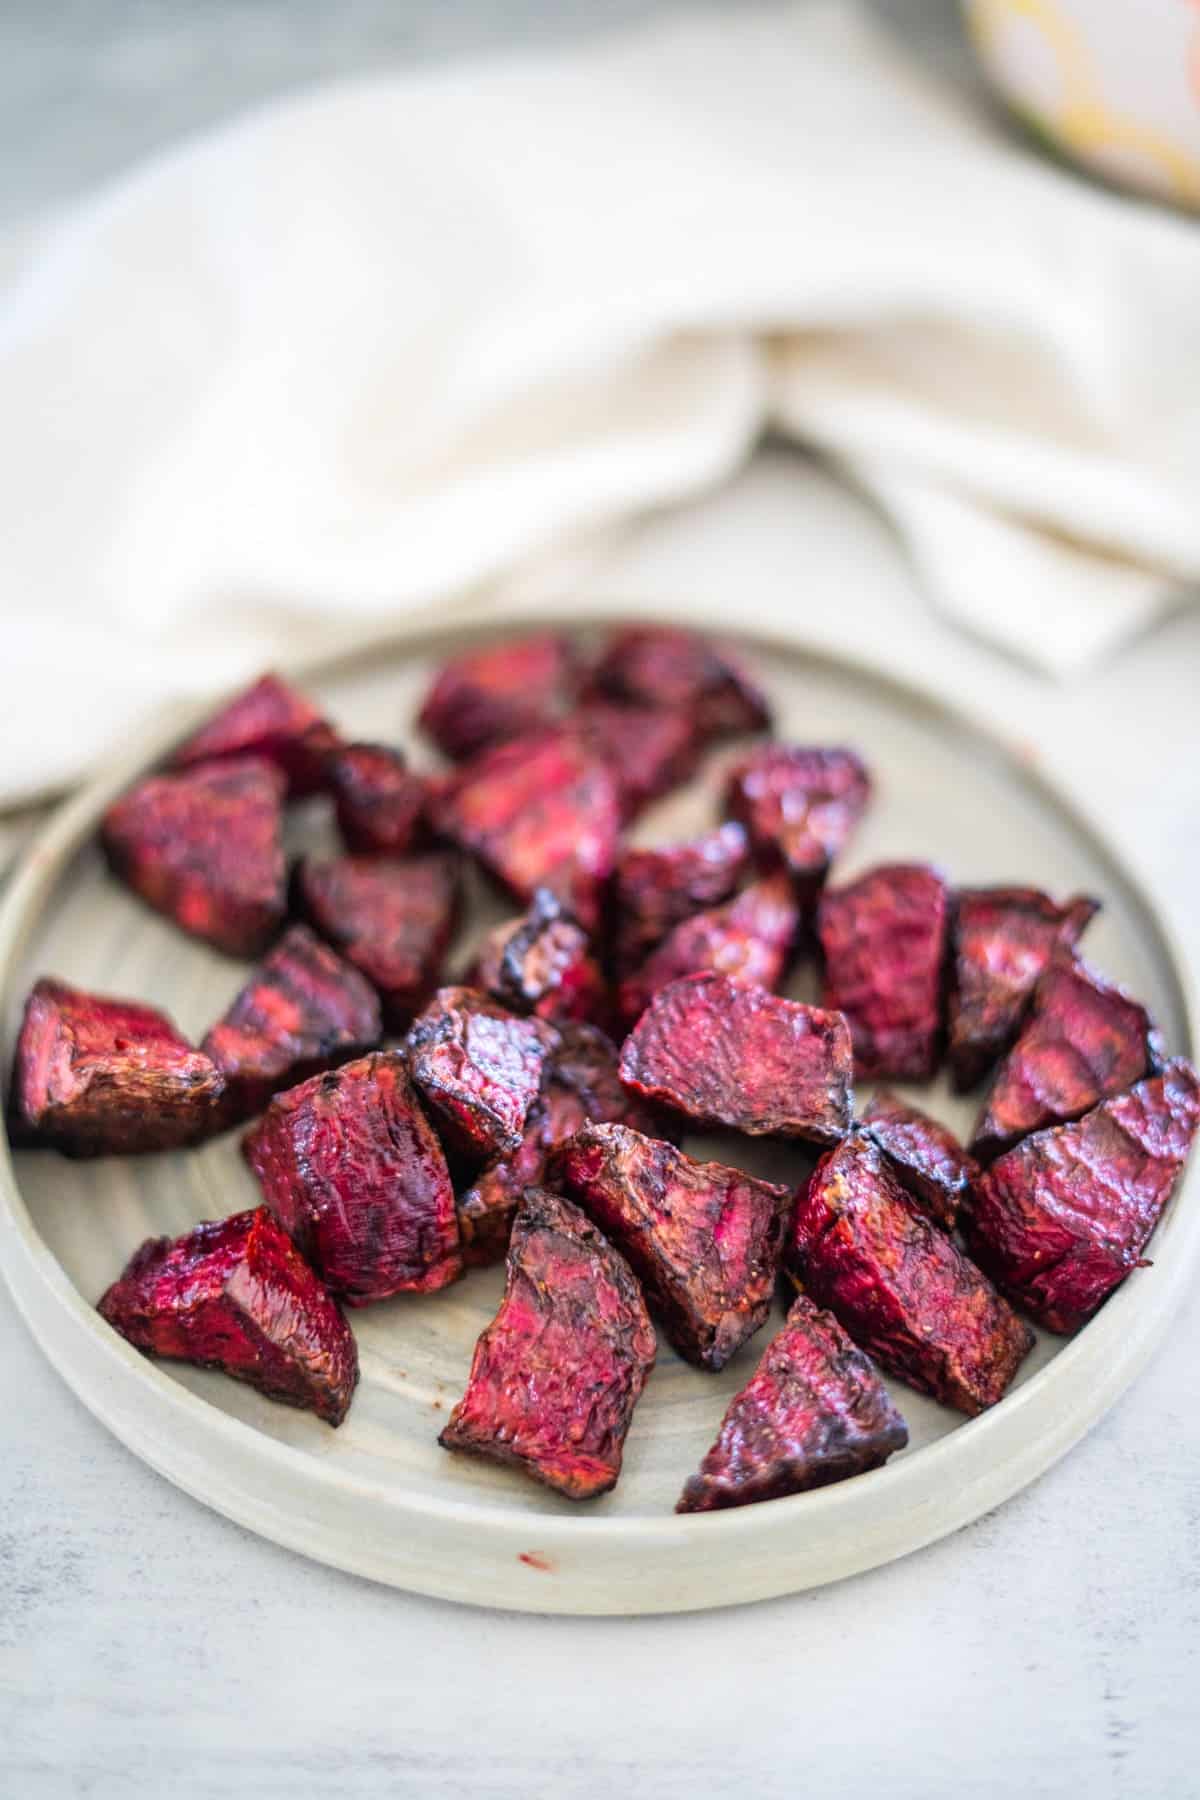 Roasted beets on a plate with a napkin.